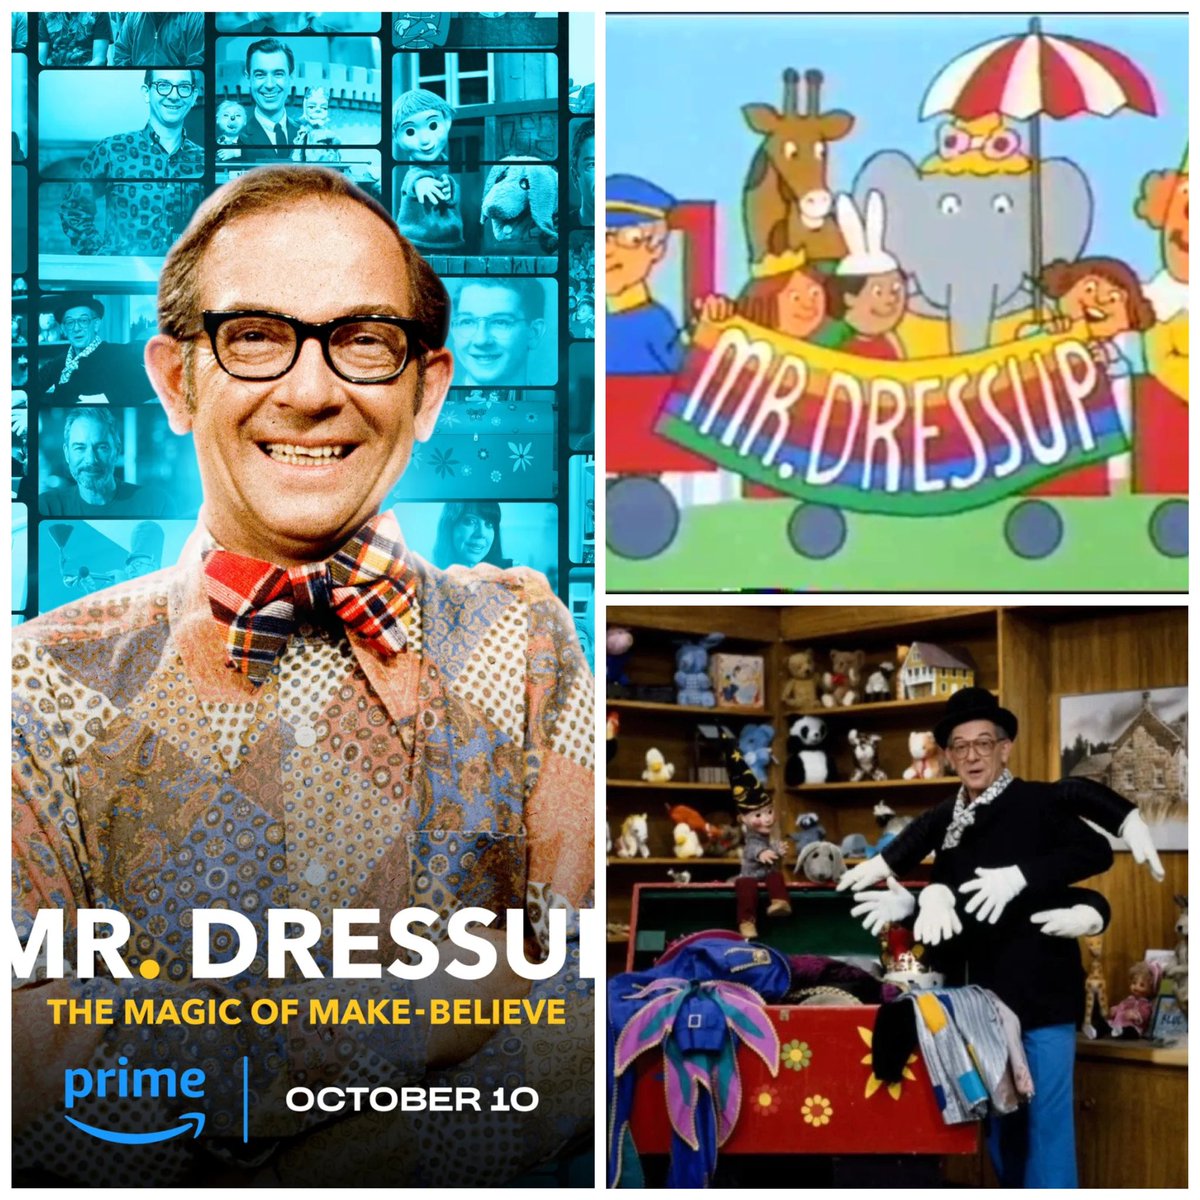 If you were a kid who grew up in Canada between 1967 & the late 1990’s, chances are you grew up on Mr. Dressup.
Watching this documentary brought back so many childhood memories, & had me unexpectedly sobbing by the end. 

Thanks for everything, Mr. Dressup 💕
#CBC #MrDressup